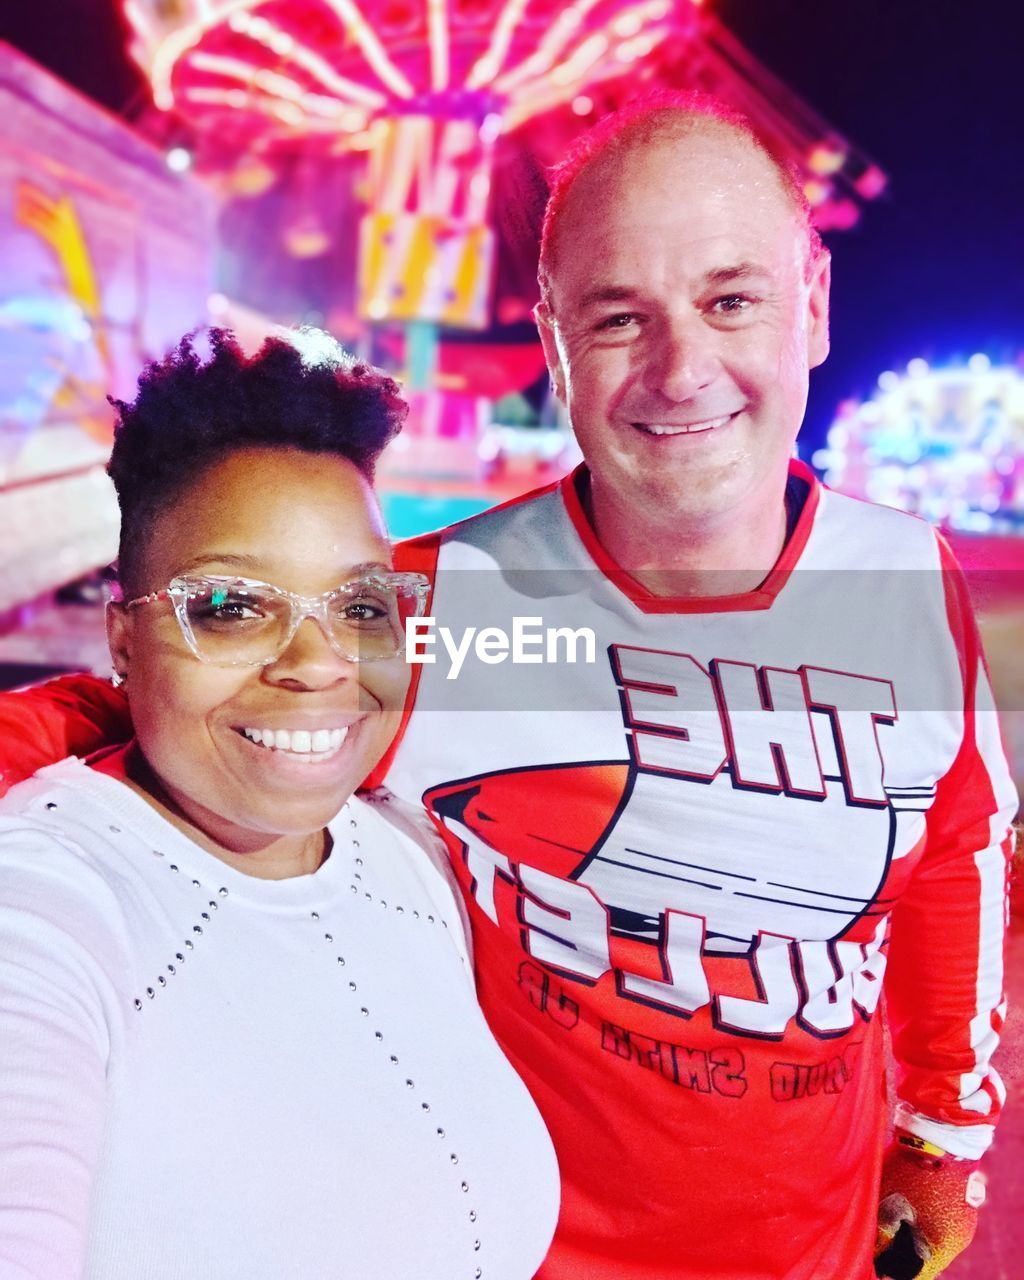 smiling, happiness, emotion, two people, adult, portrait, looking at camera, men, cheerful, togetherness, positive emotion, young adult, sports, waist up, event, celebration, women, red, enjoyment, night, love, clothing